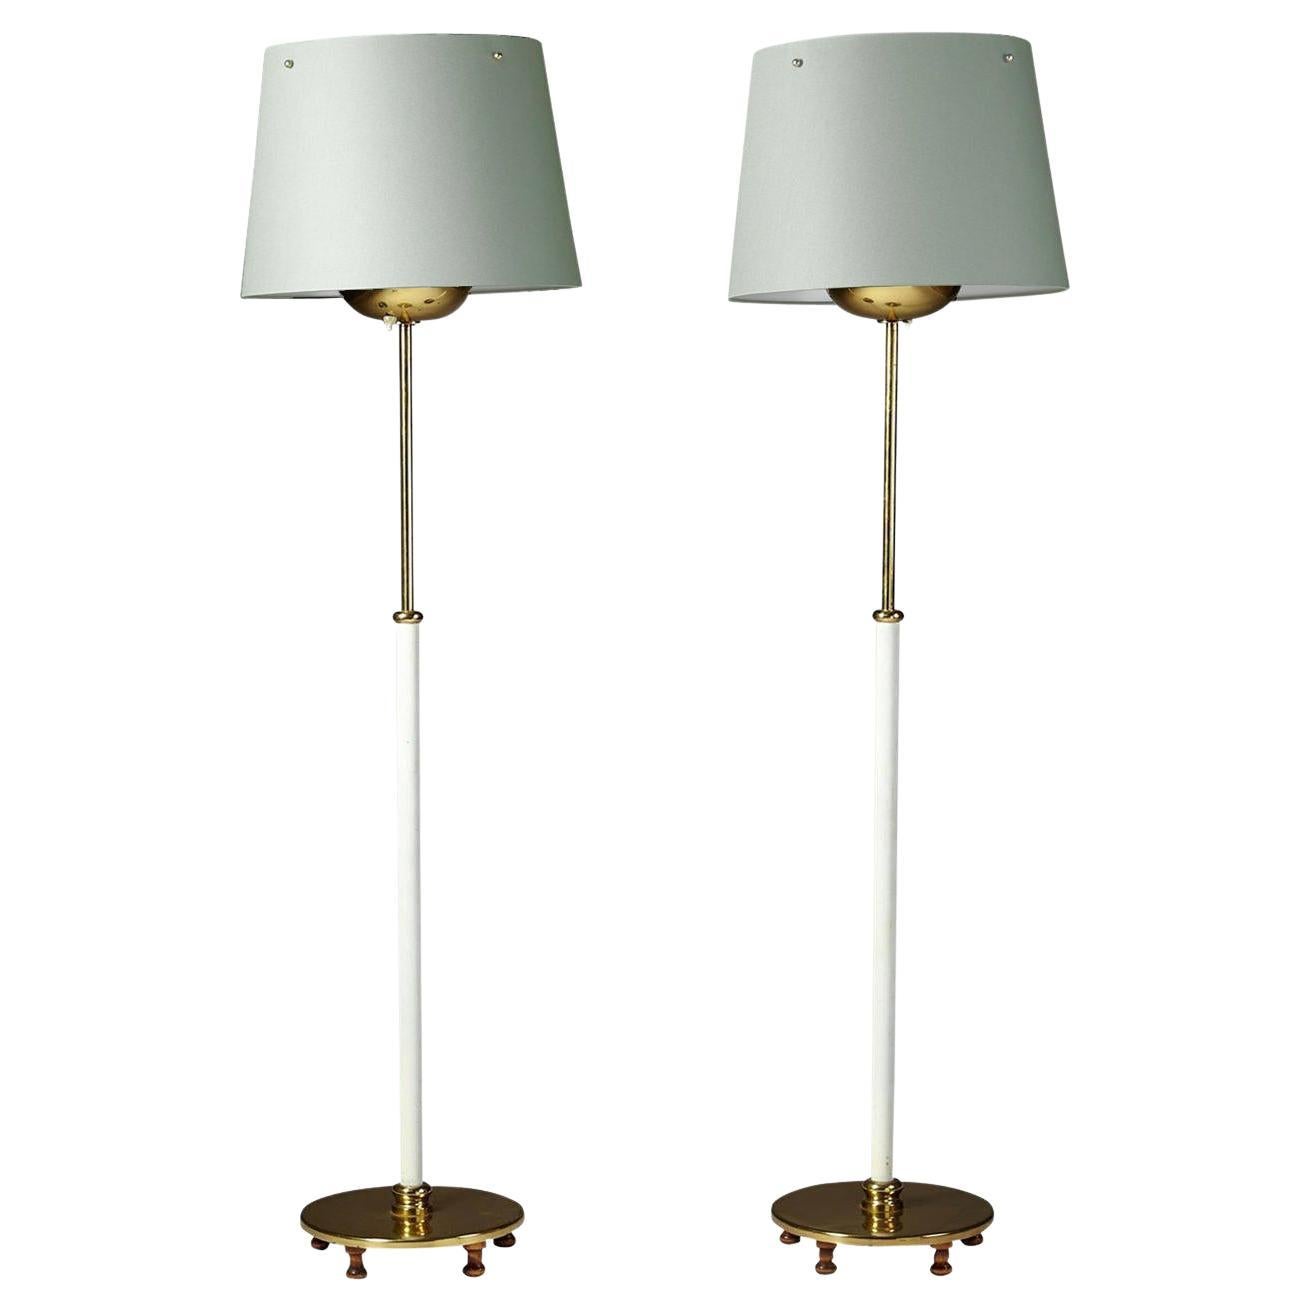 Pair of Floor Lamps by Josef Frank, circa 1950 For Sale